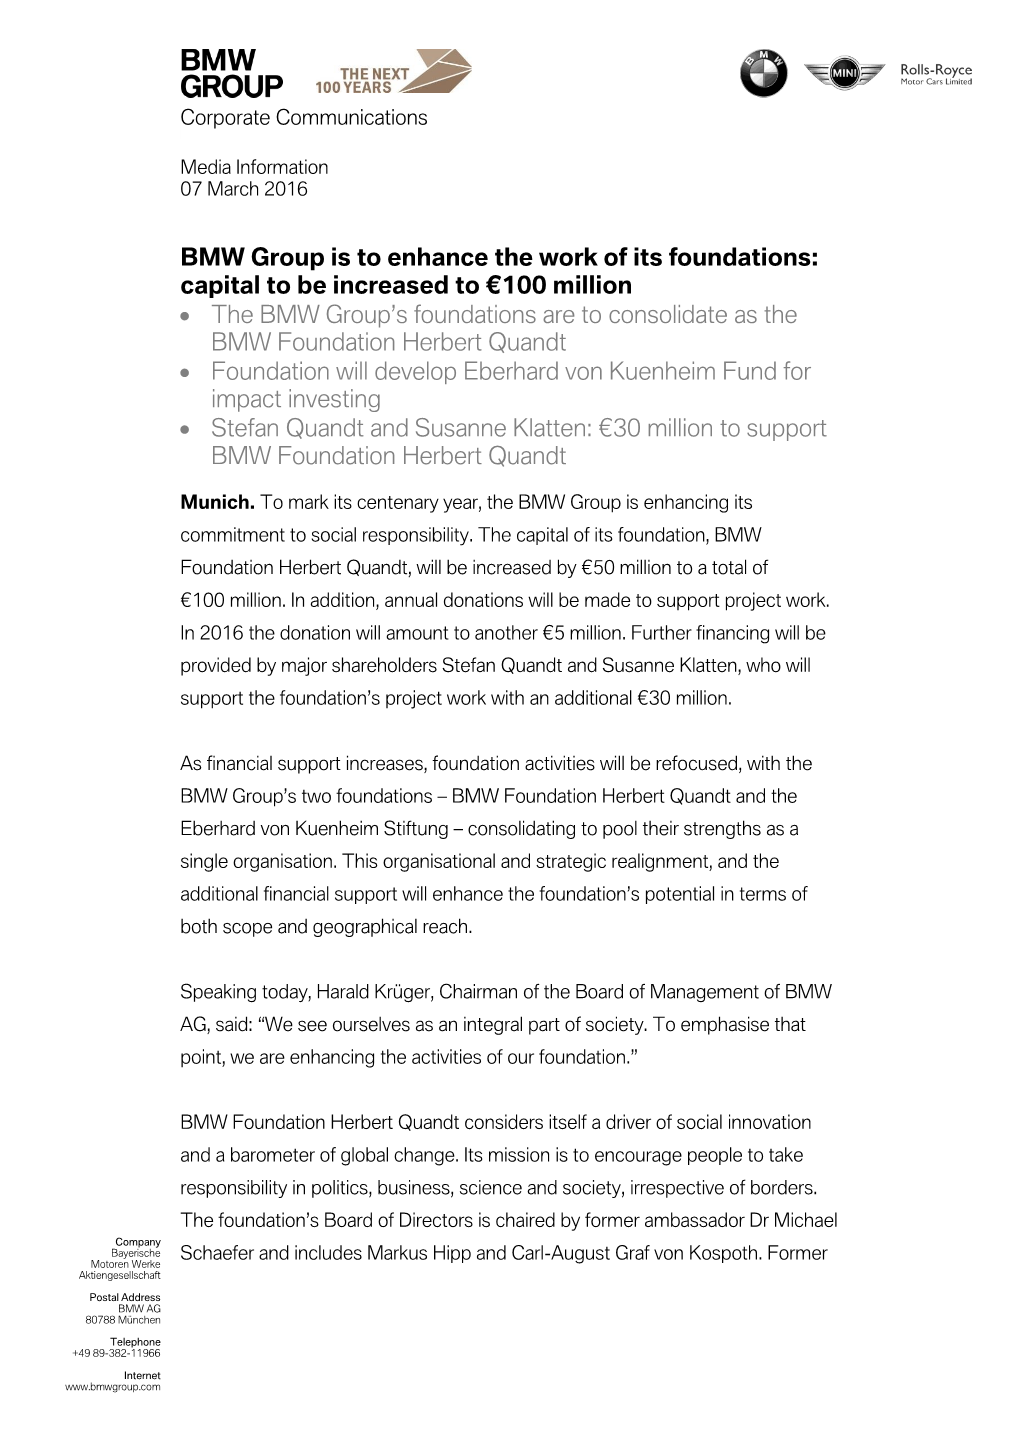 BMW Group Is to Enhance the Work of Its Foundations